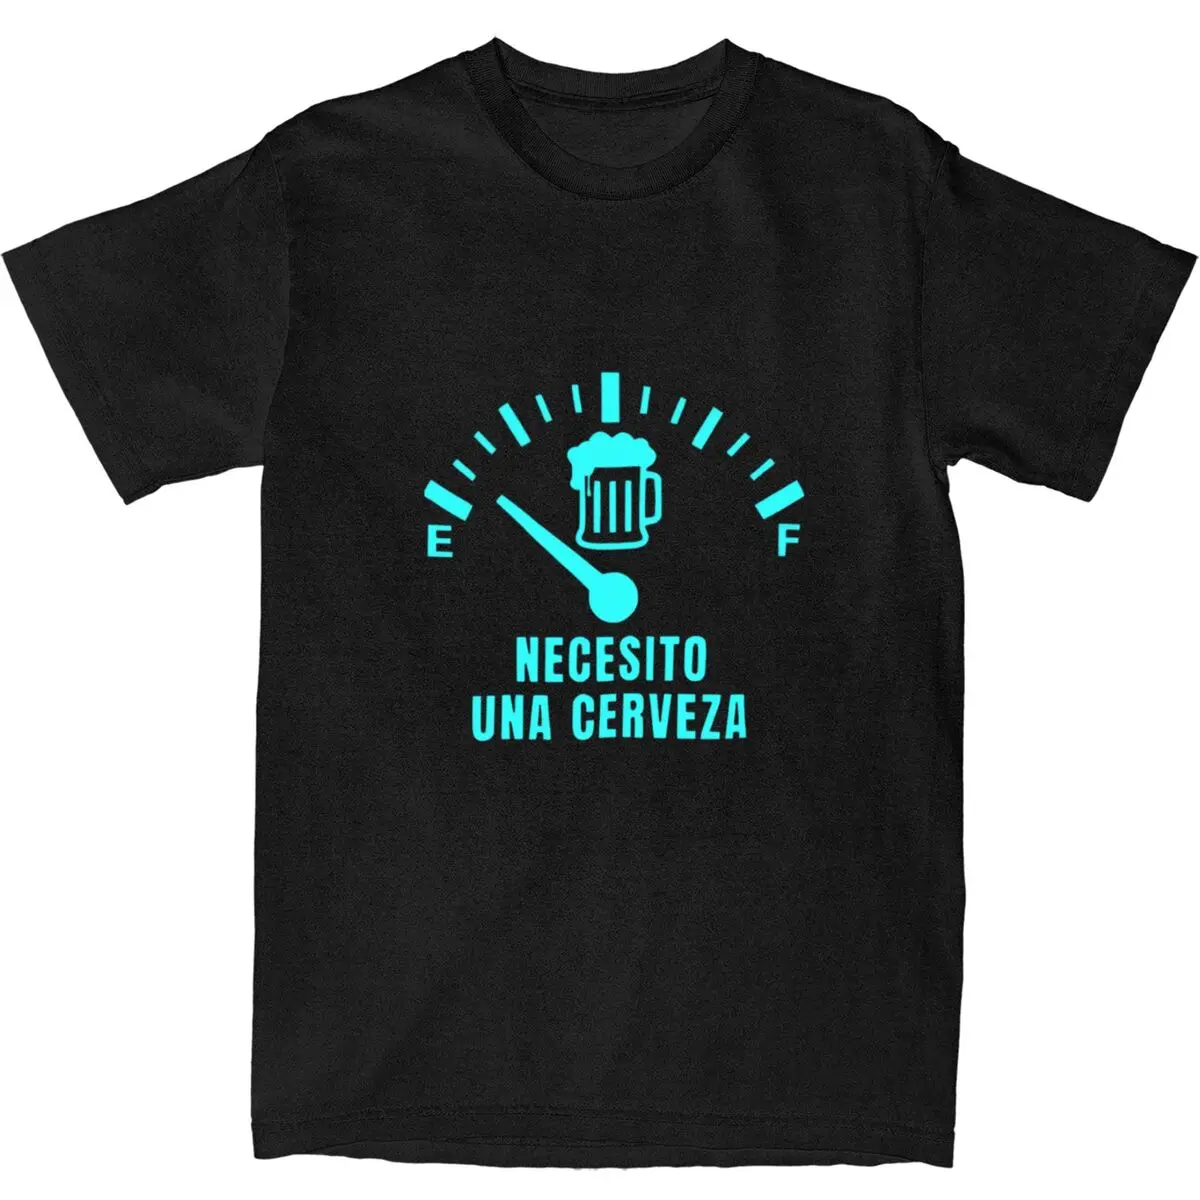 Streetwear T-Shirt Necesito Una Cerveza Cotton T-Shirts Trendy Cool Tee Shirt for Mens Y2K Basic Design Short Sleeve Top Tees